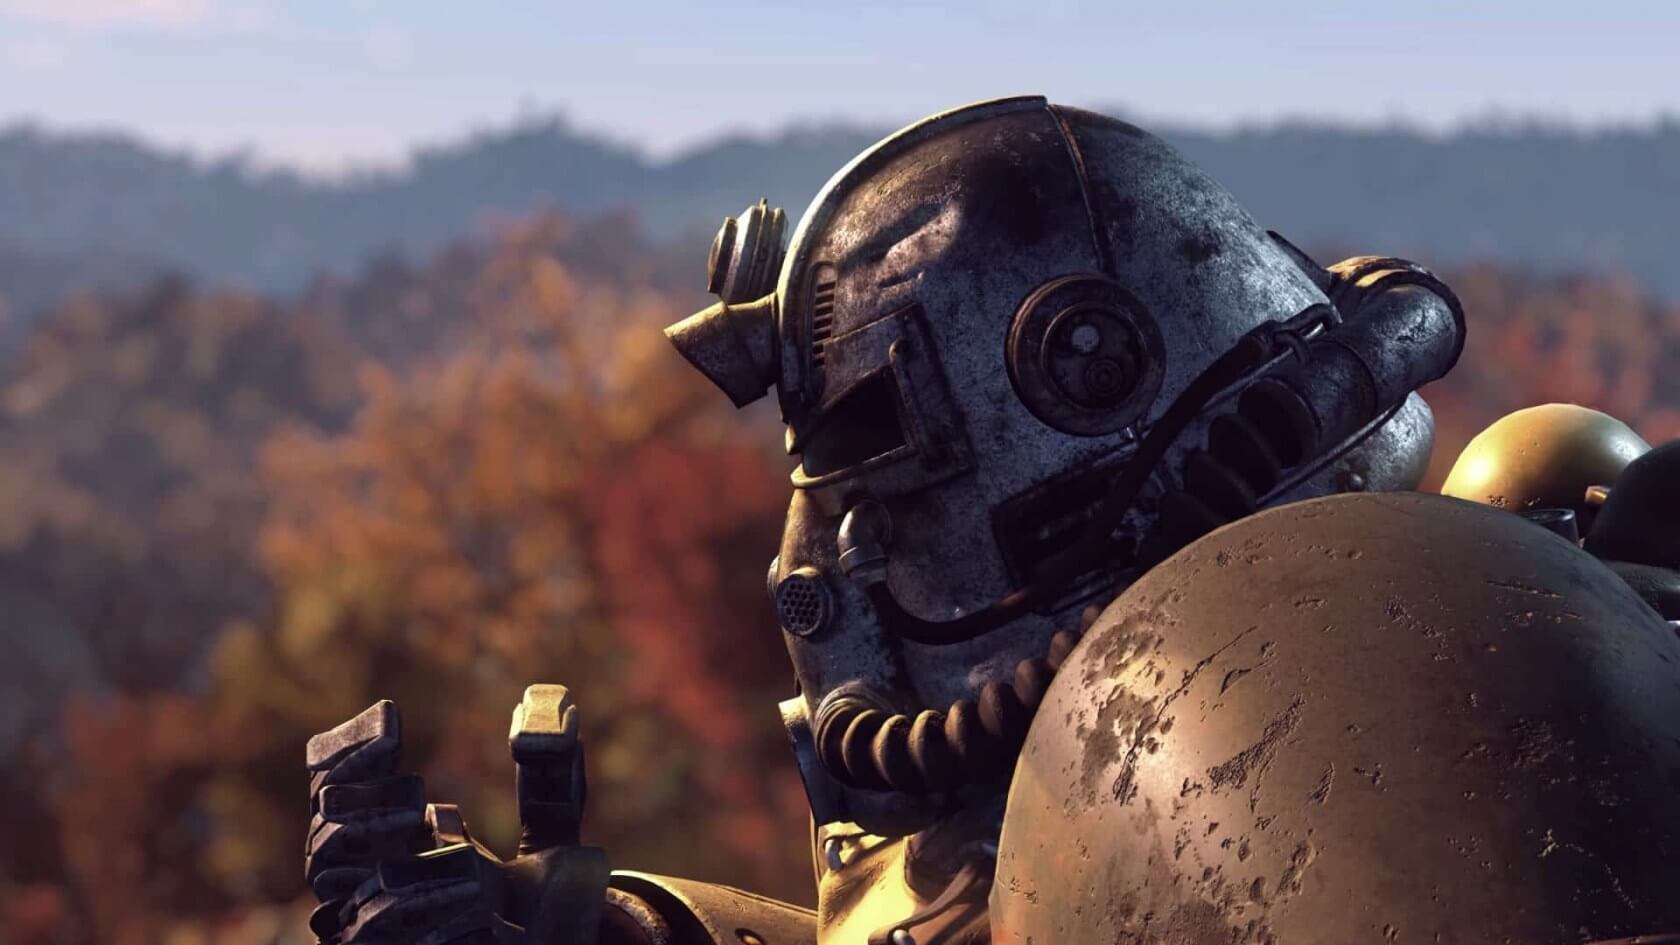 Fallout 76's beta has been locked at 63 FPS and 90 FOV on PC